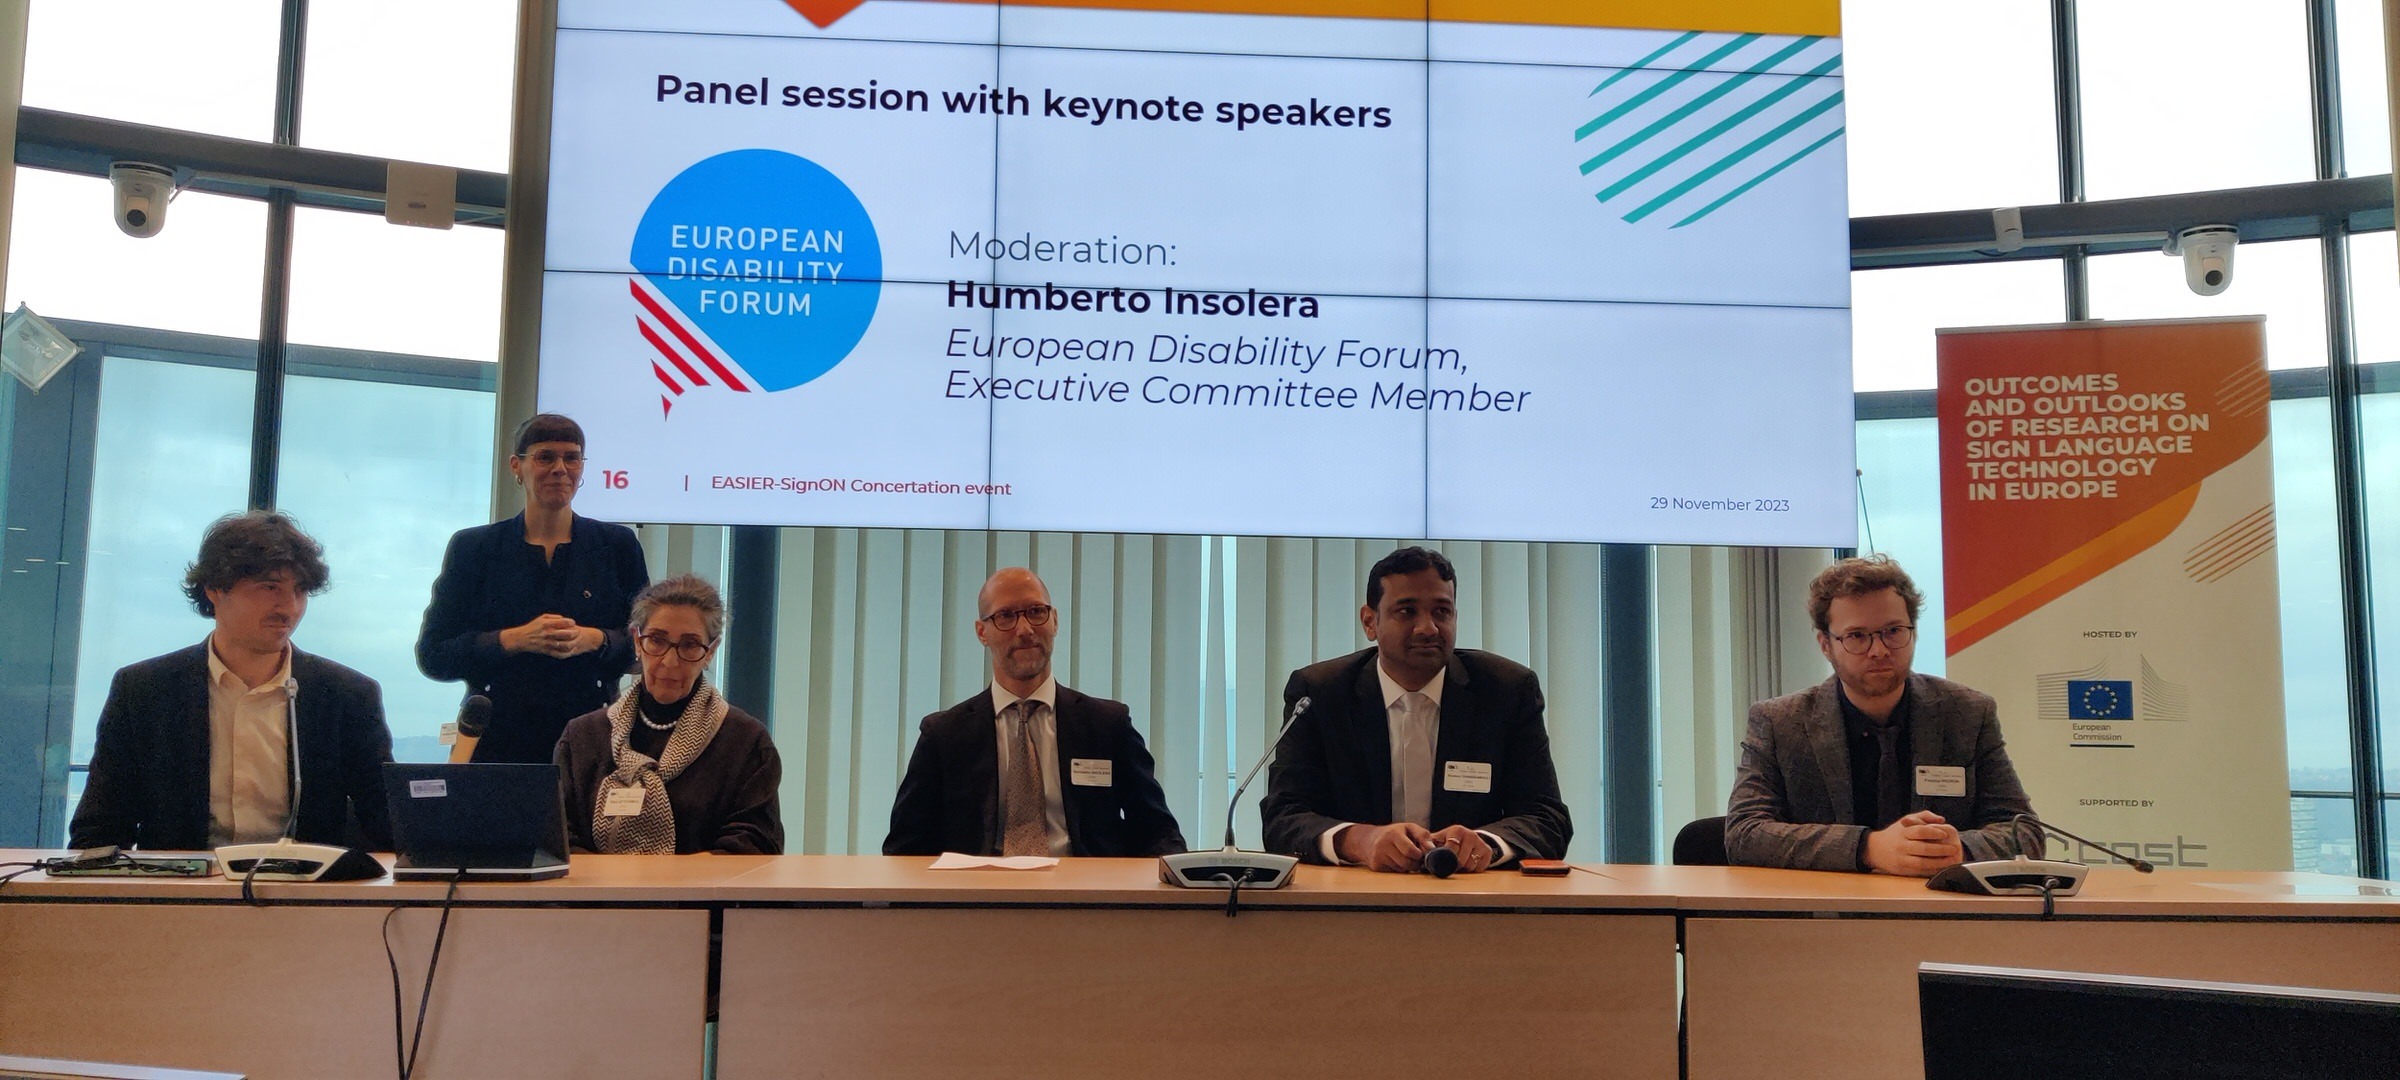 Panel discussion moderated by Humberto Insolera (Executive Committee Member of the European Disability Forum) explored the way forward for sign language research in Europe. The panel included Frankie Picron (SignON, EASIER, EUD), Dimitar Shterionov (SignON), Eleni Efthimiou (EASIER), and Krishna Chandramouli (LEAD-ME)